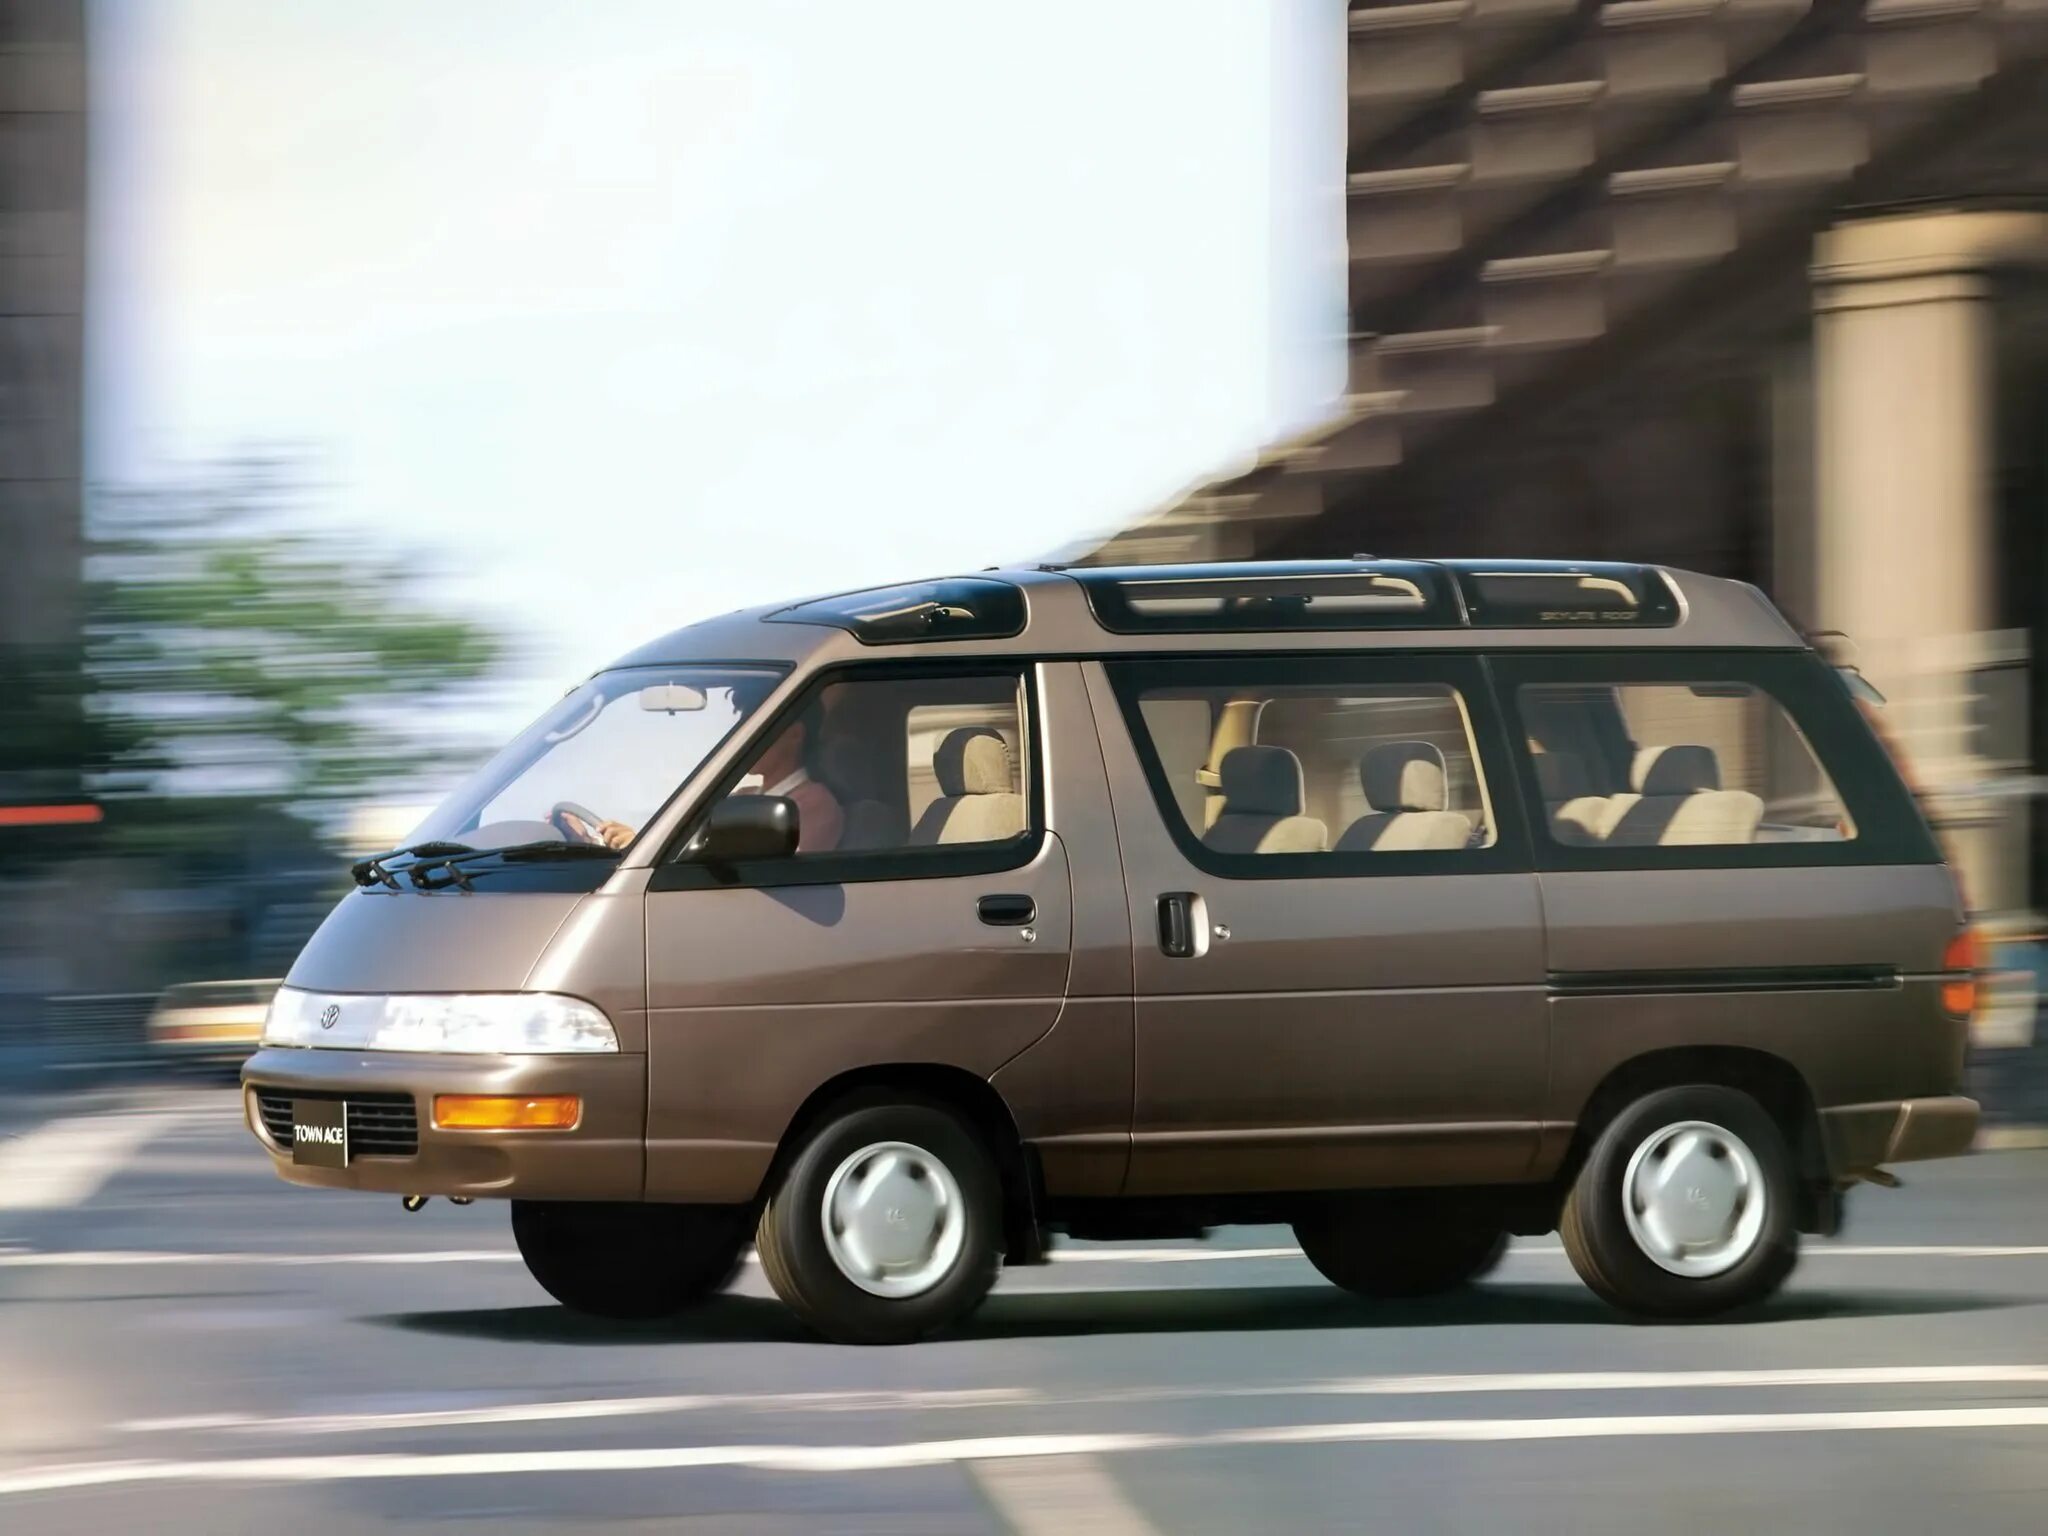 Toyota Town Ace. Тойота Town Ace 1996. Toyota Town Ace 1992-1996. Тойота Таун айс 1994. Таун айс 1992